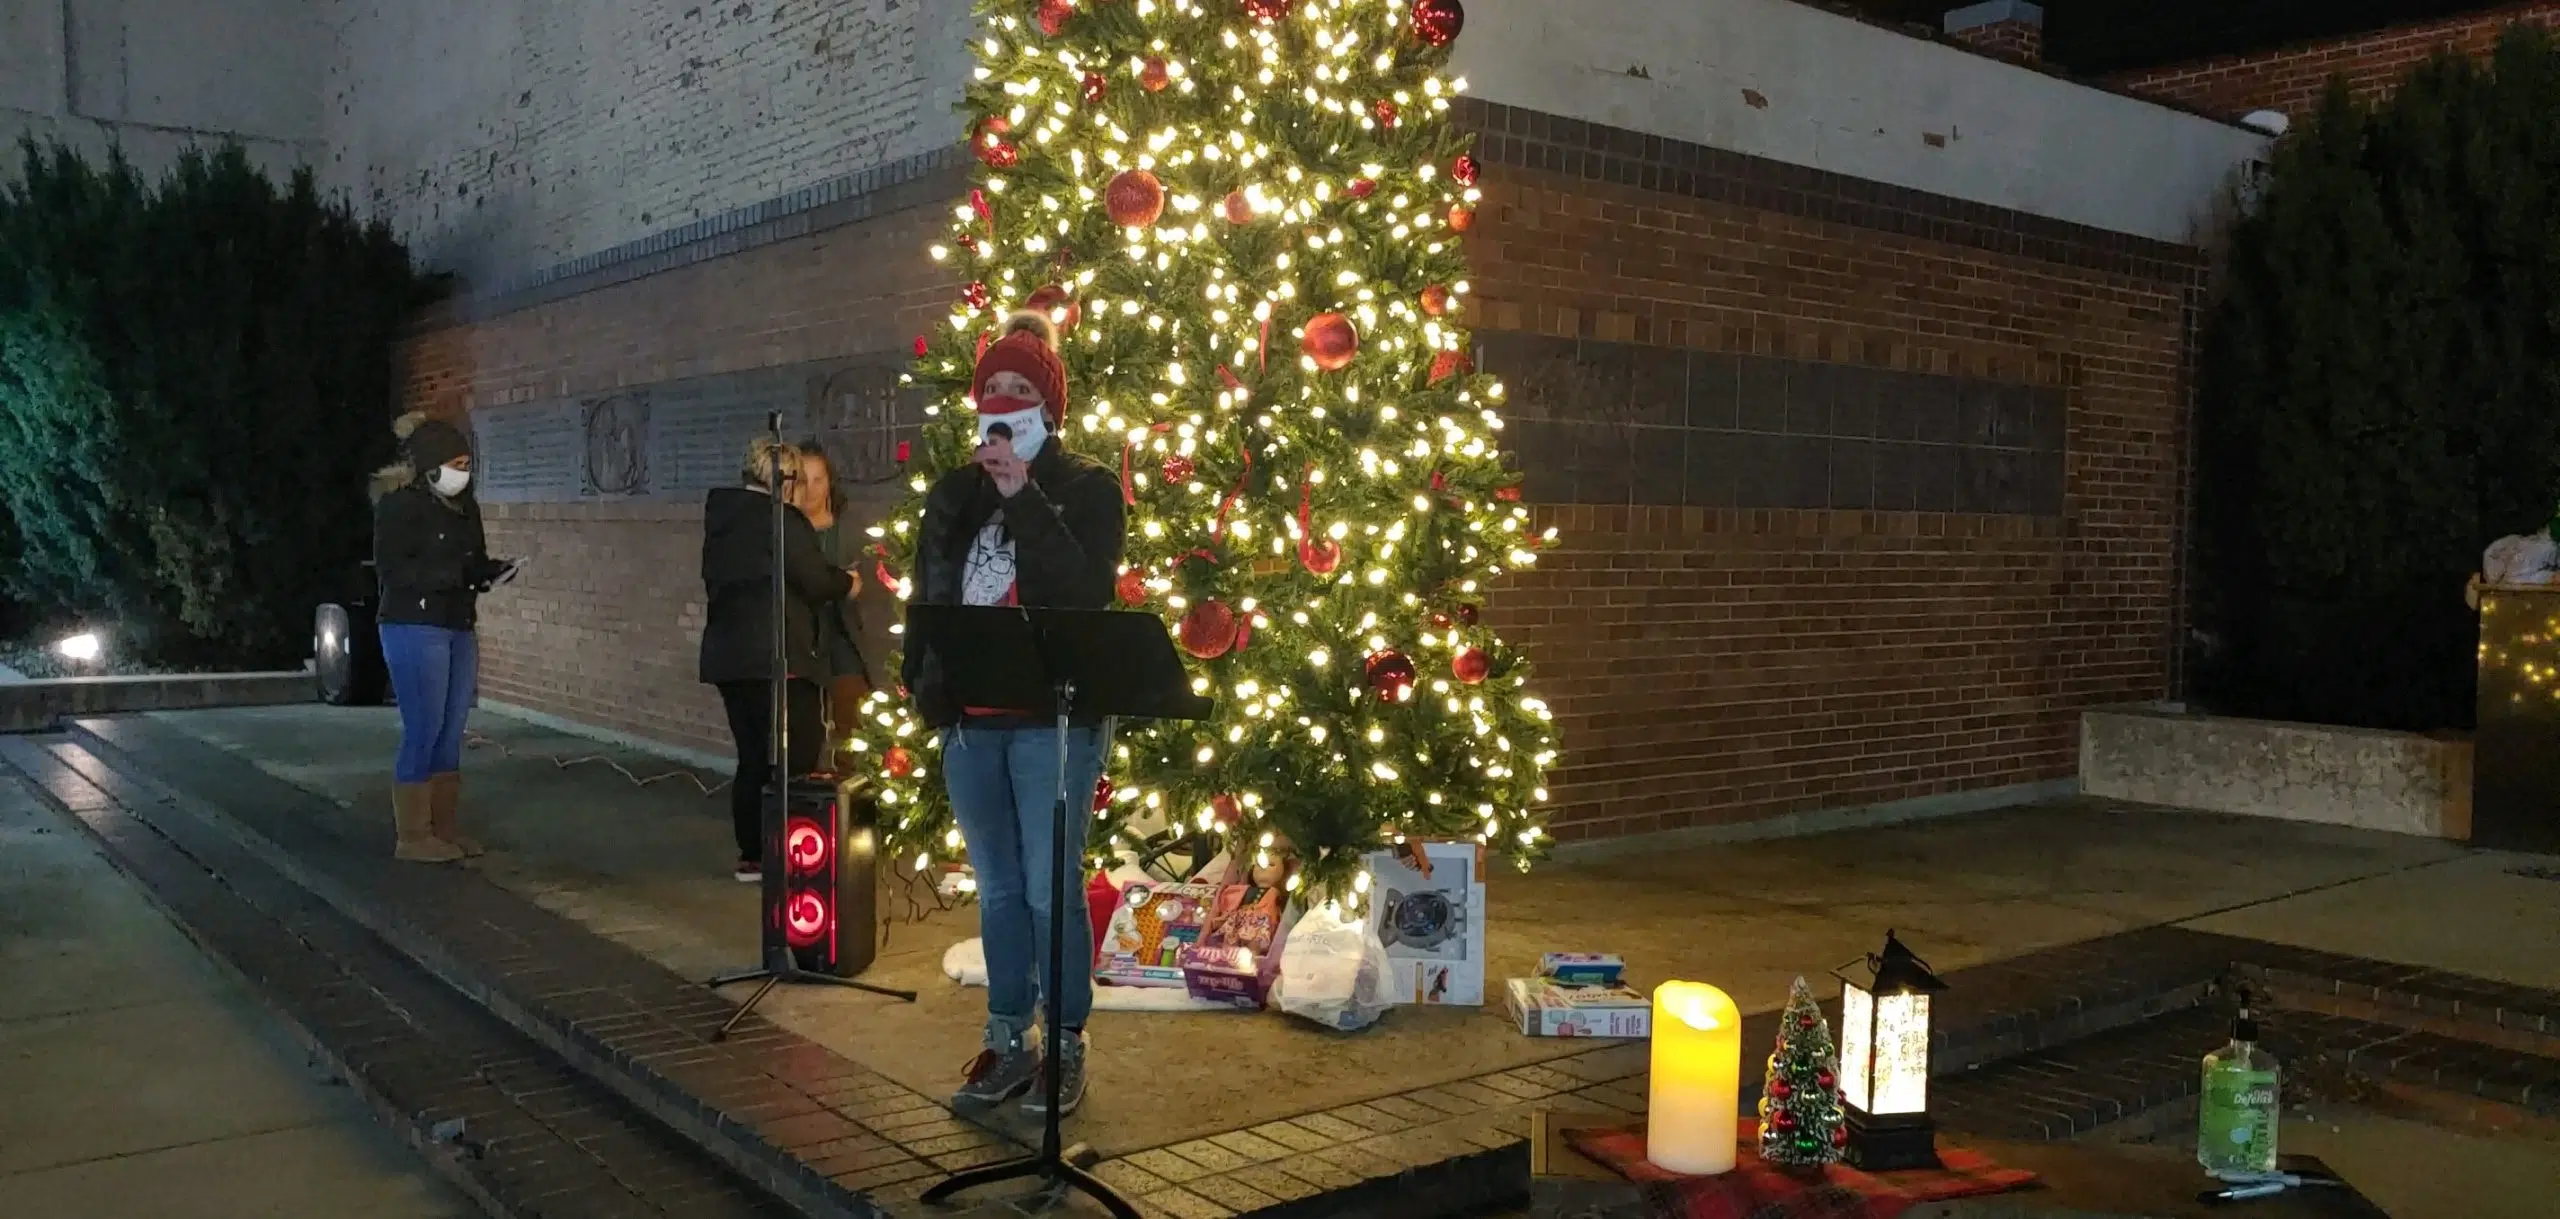 Third annual tree lighting and toy drive in memory of Ace Garate coming Sunday